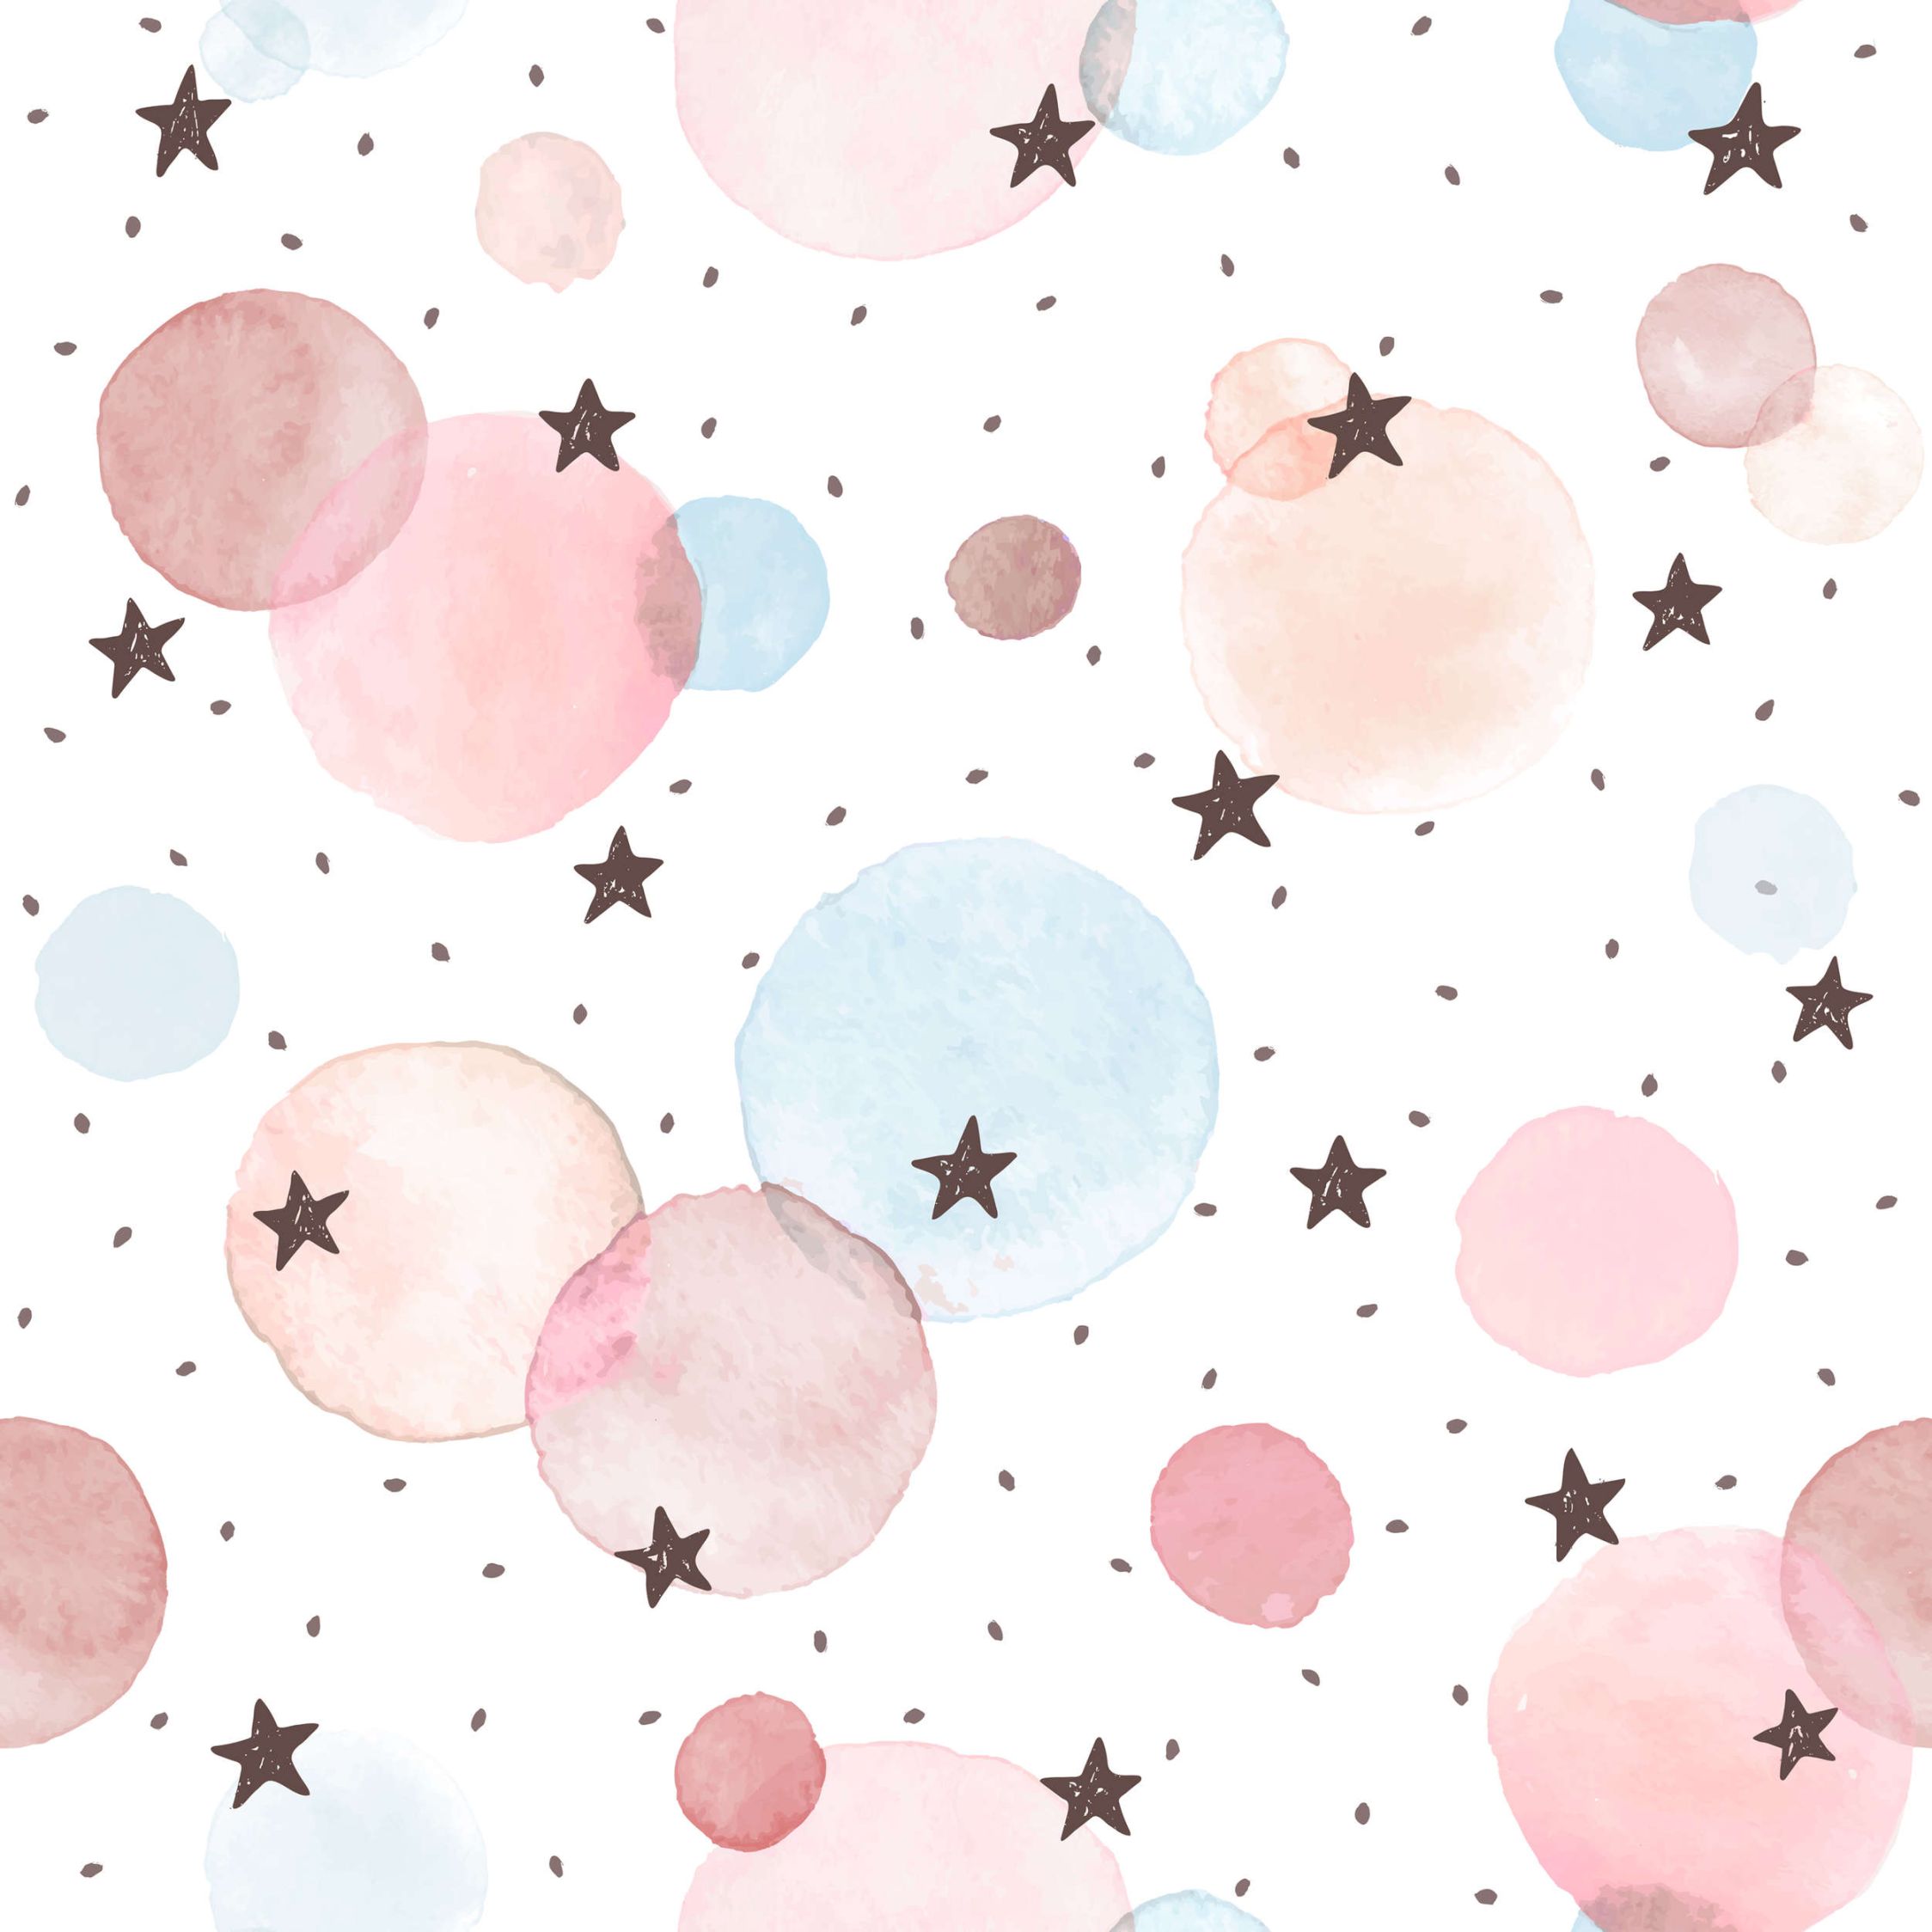             Photo wallpaper for children's room with stars, dots and circles - Smooth & matt non-woven
        